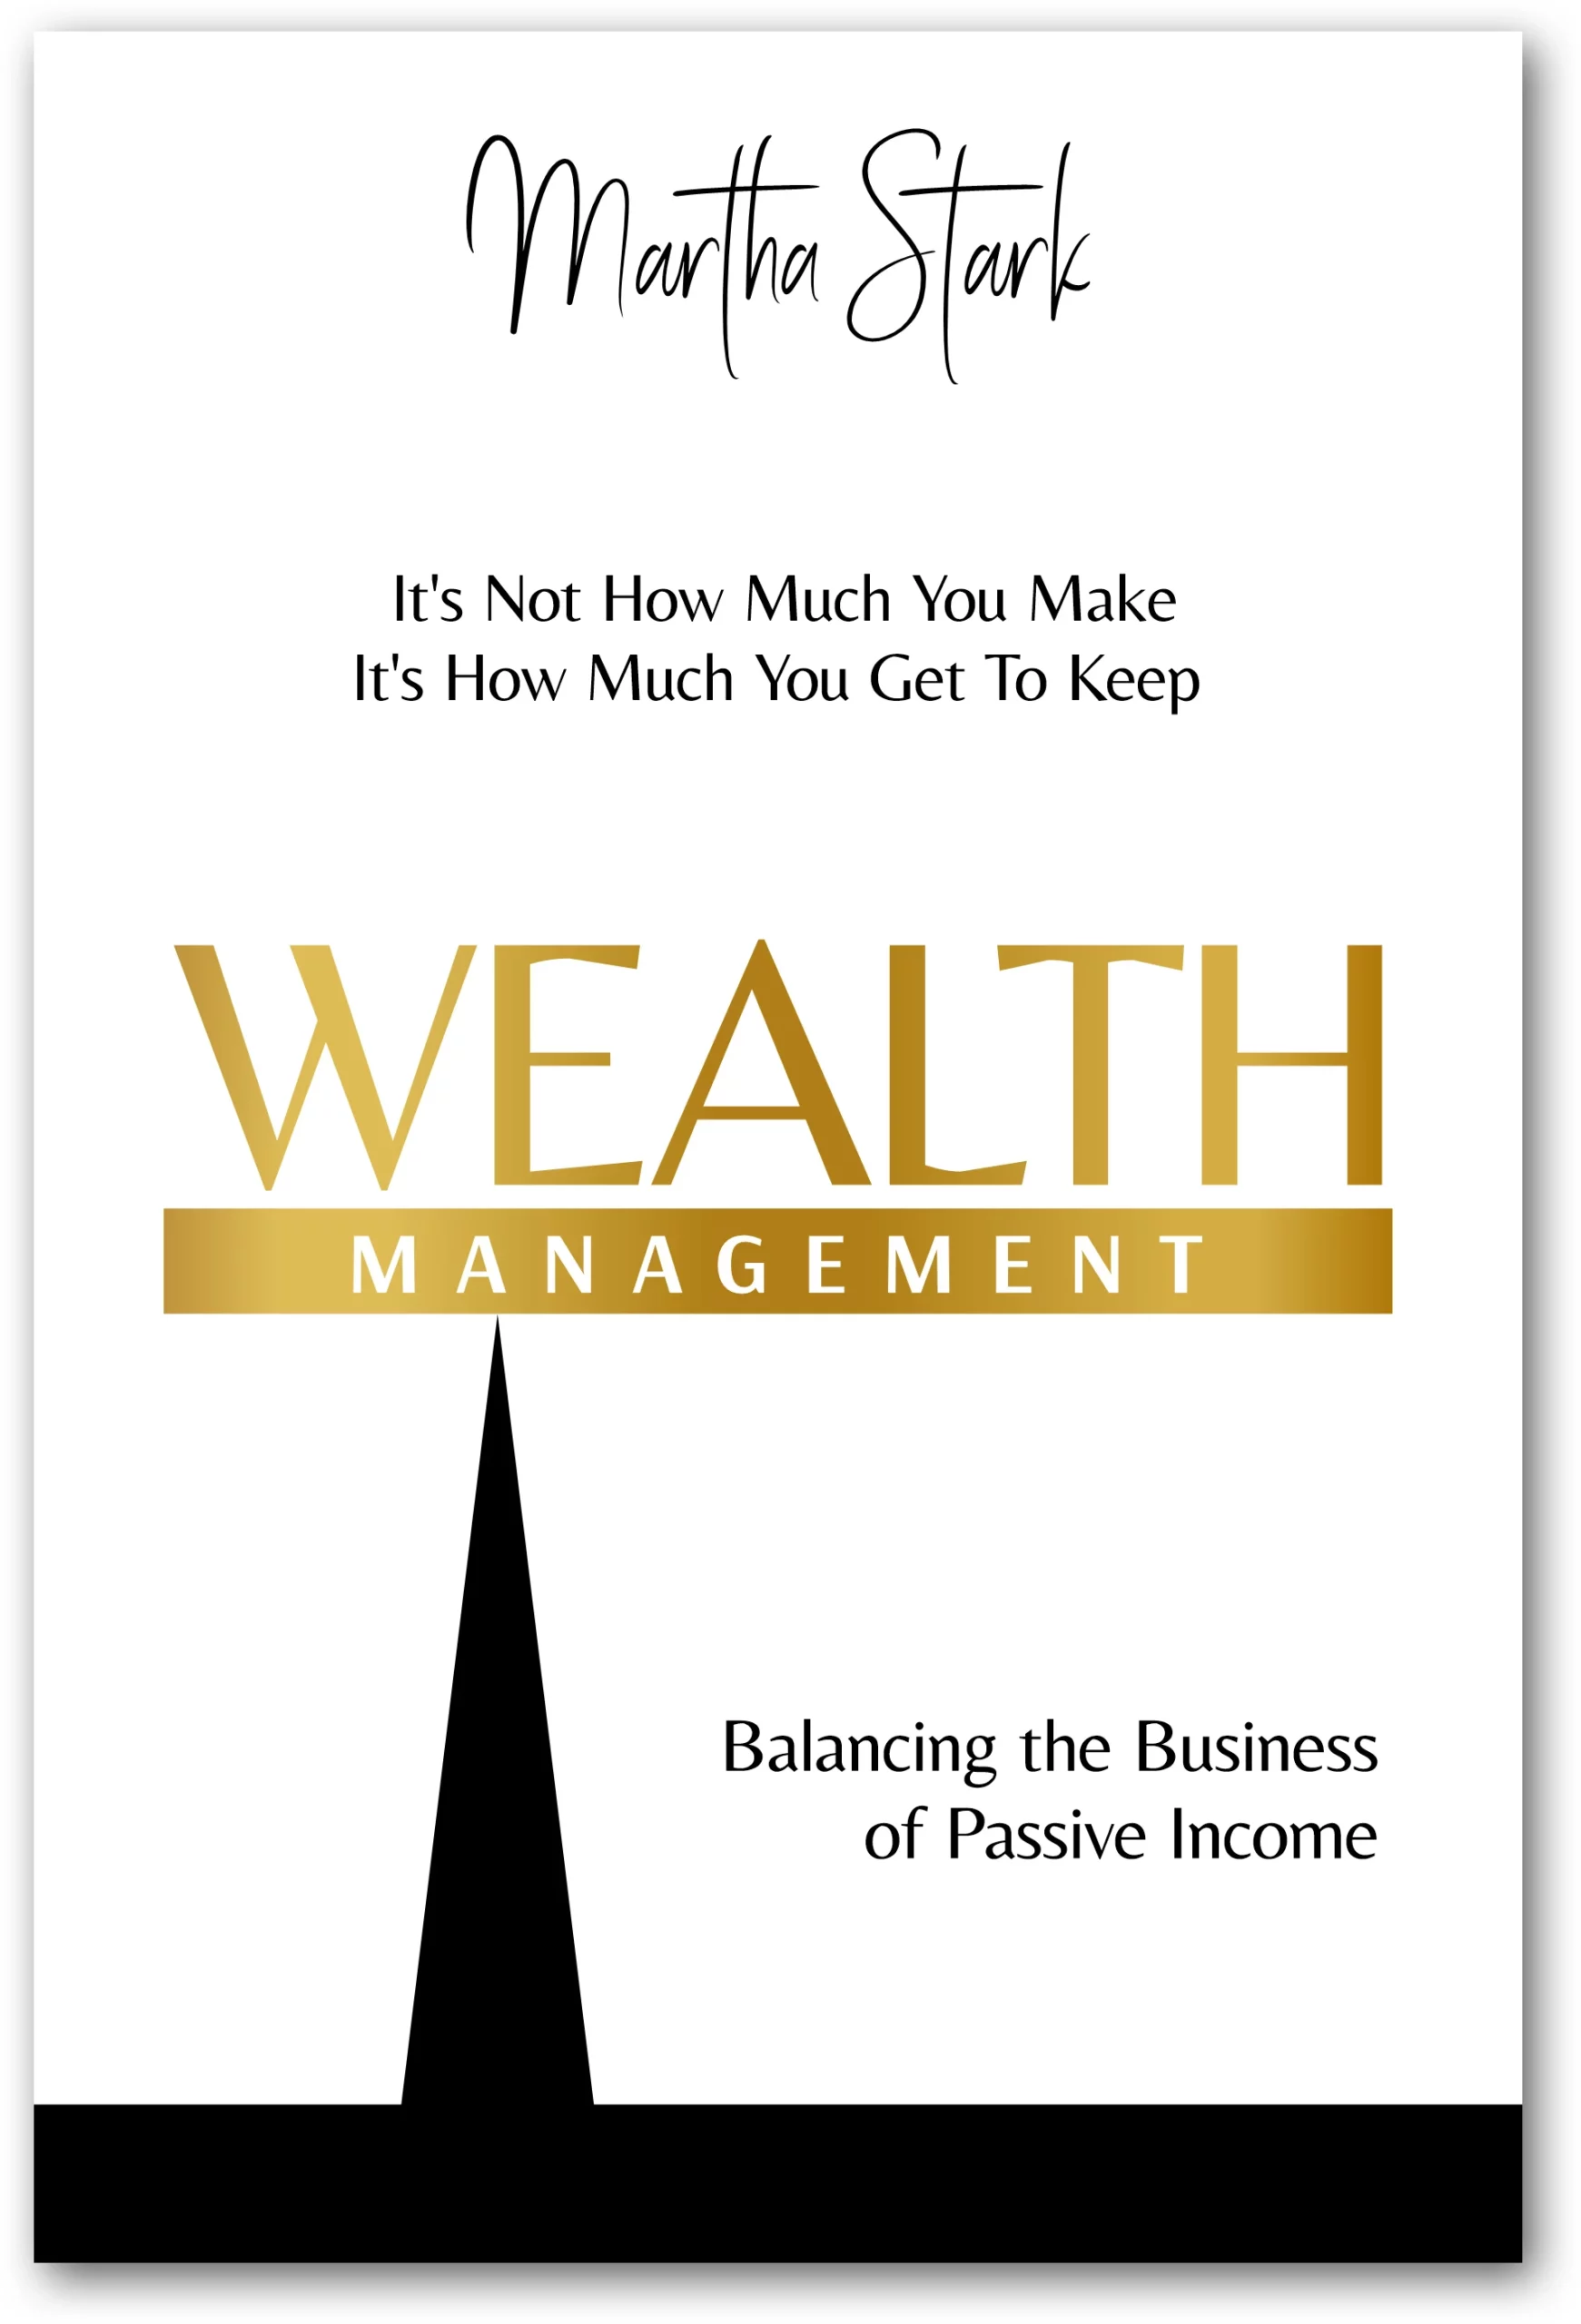 Wealth Management – Balancing the Business of Passive Income